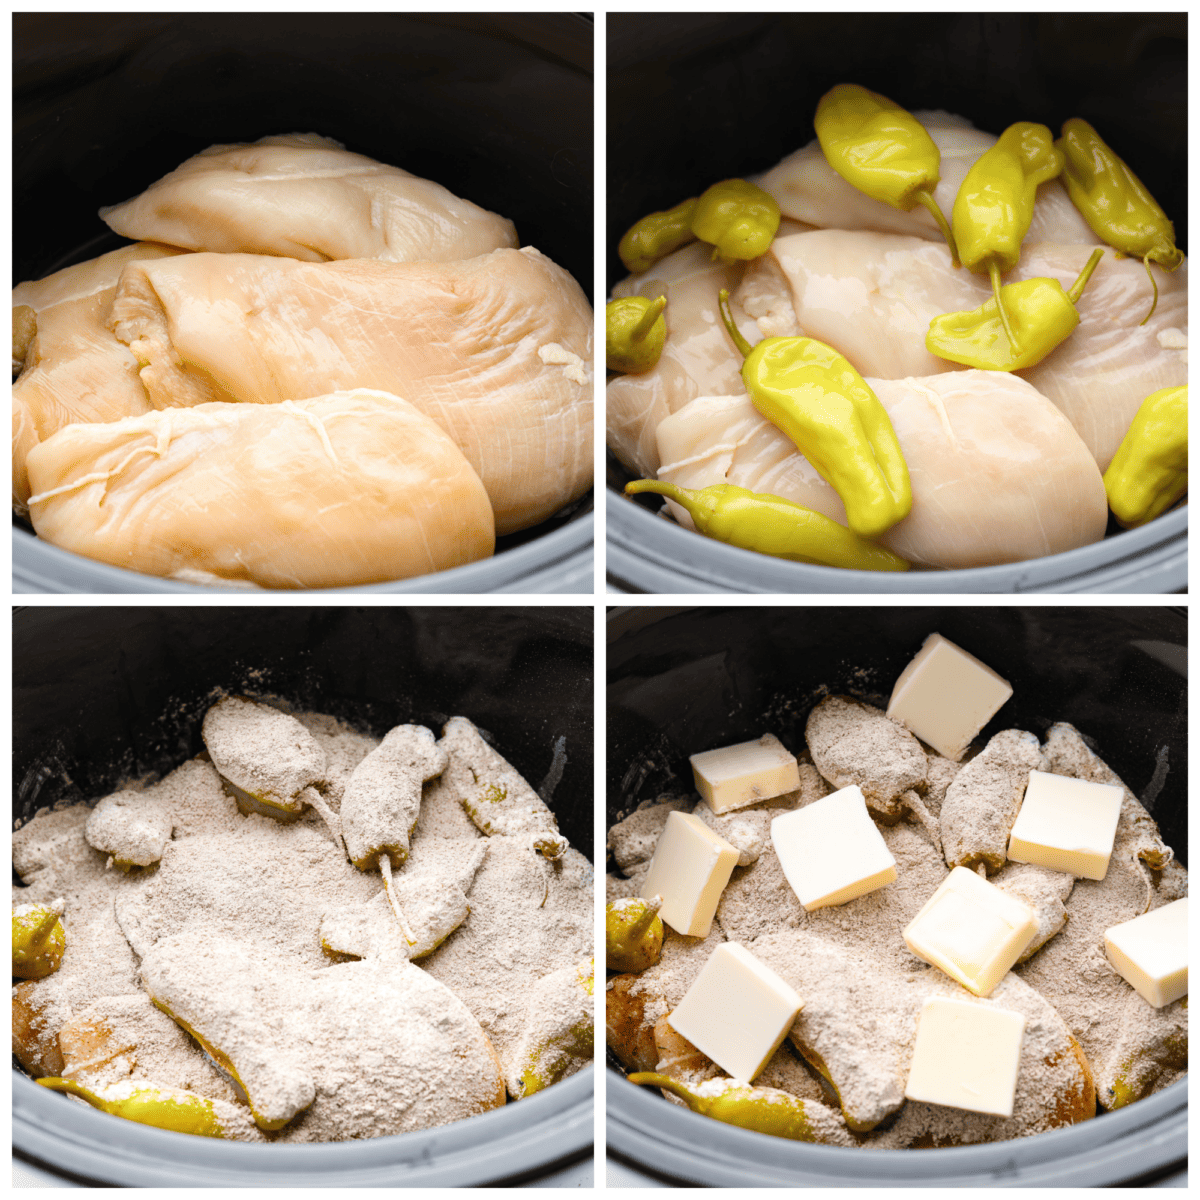 4-photo collage of chicken breasts being added to a Crockpot along with pepperoncinis, seasonings, and butter.